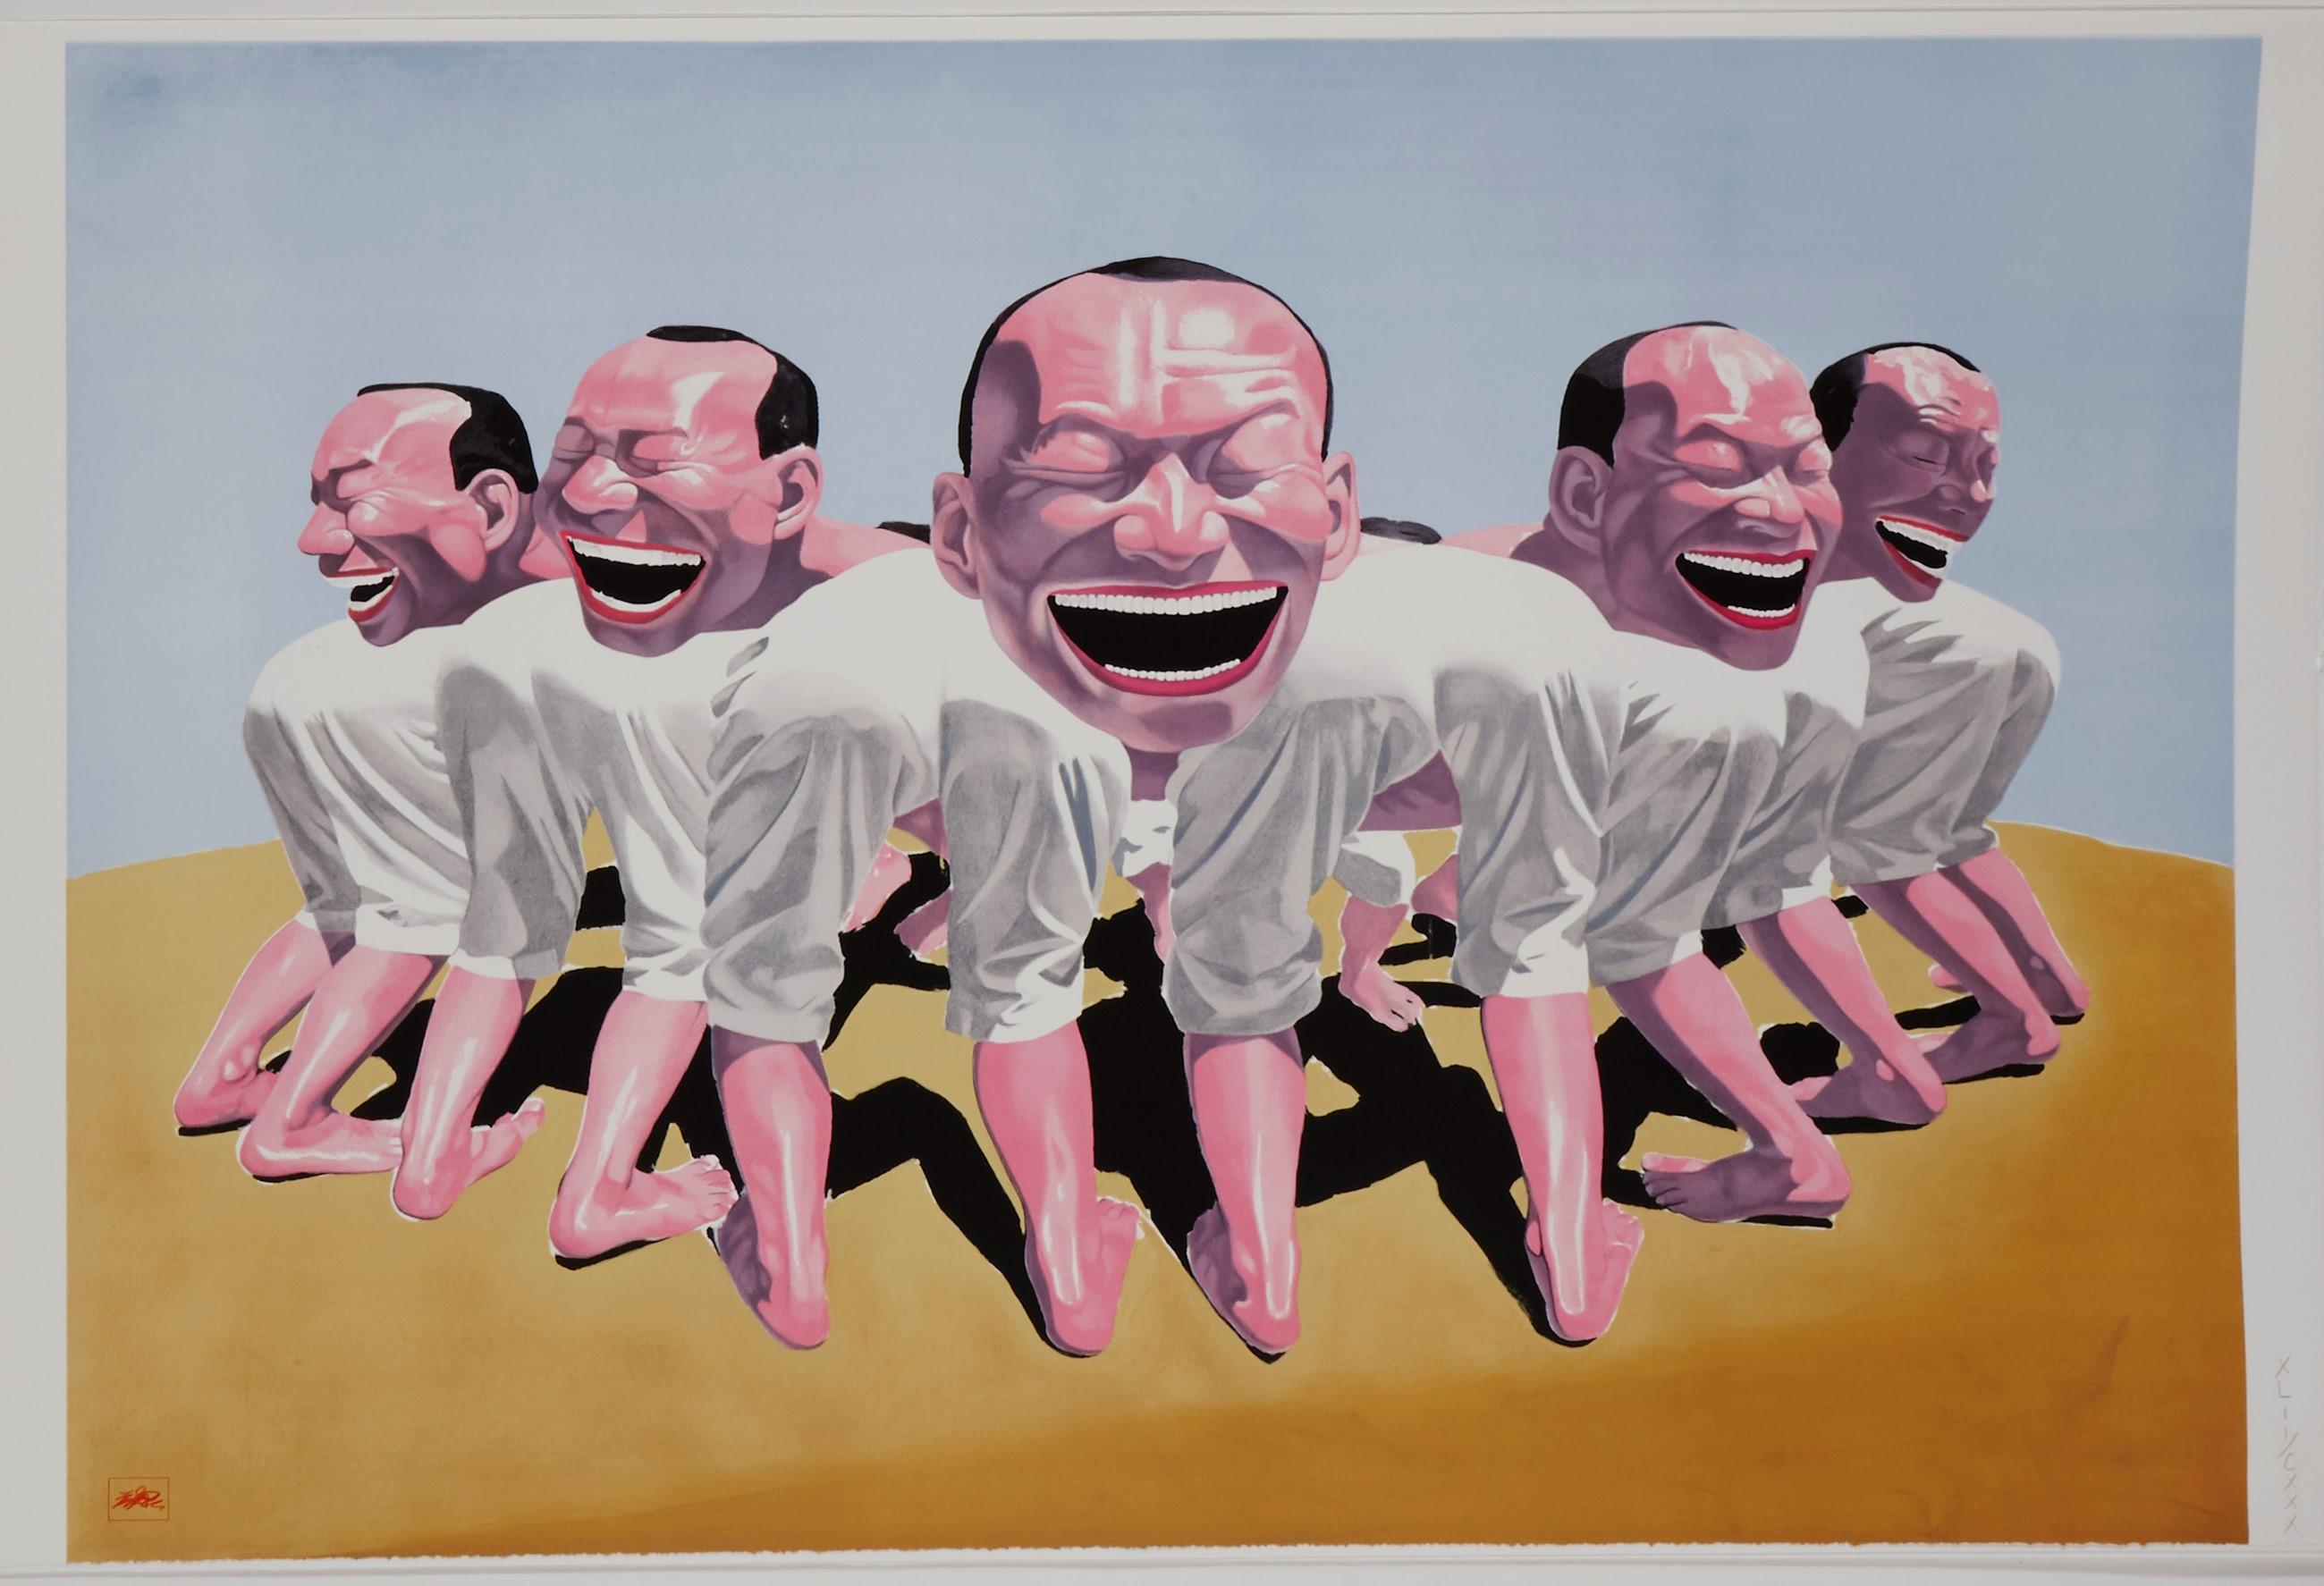 Sheep Herd - Contemporary, 21st Century, Lithograph, Limited Edition, Chinese - Print by Yue Minjun